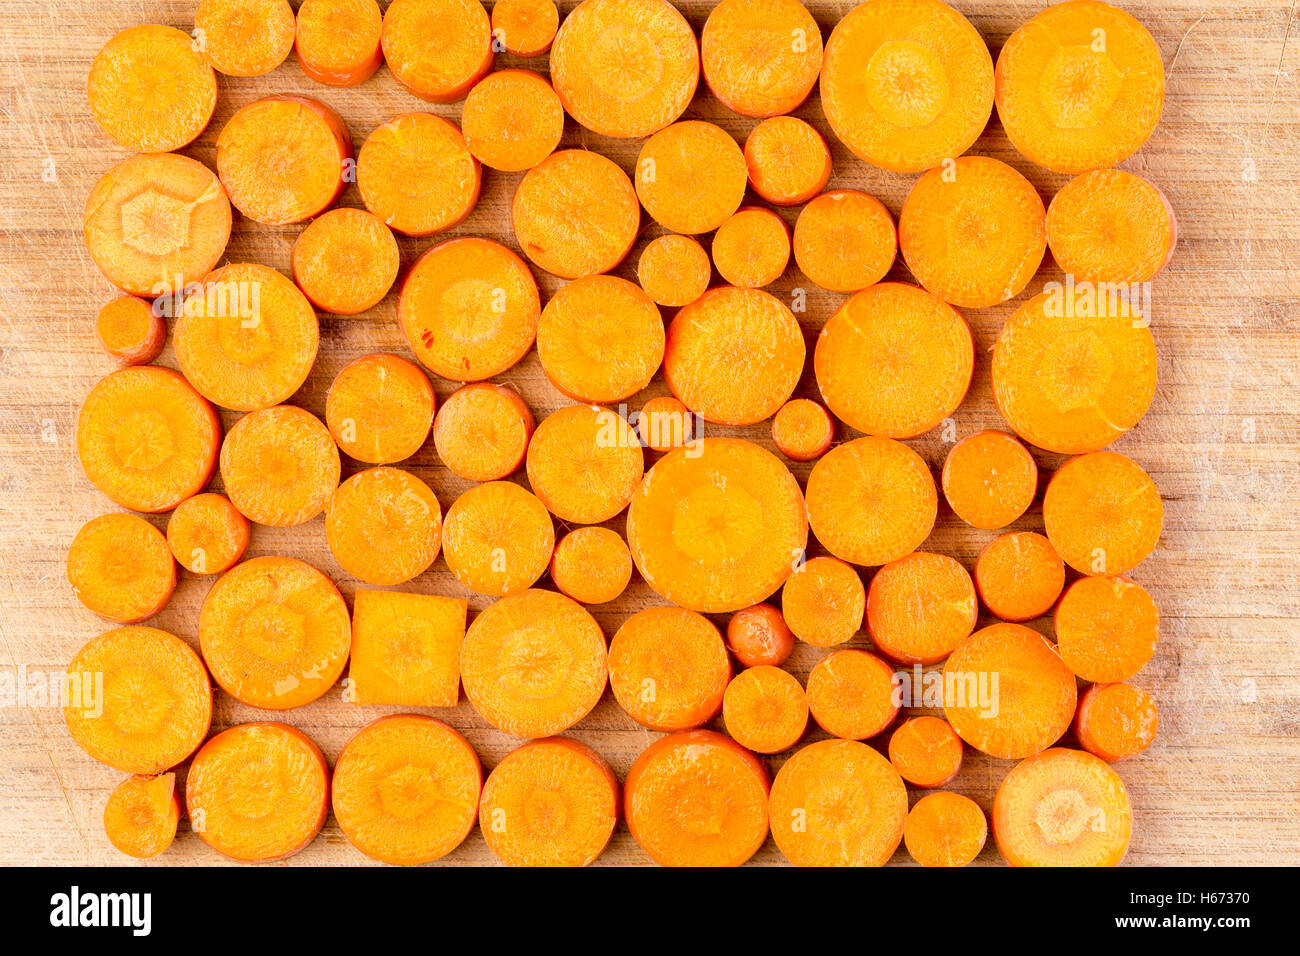 Top down view on chopped circular and rectangular orange colored carrots arranged in neat rows on cutting board Stock Photo